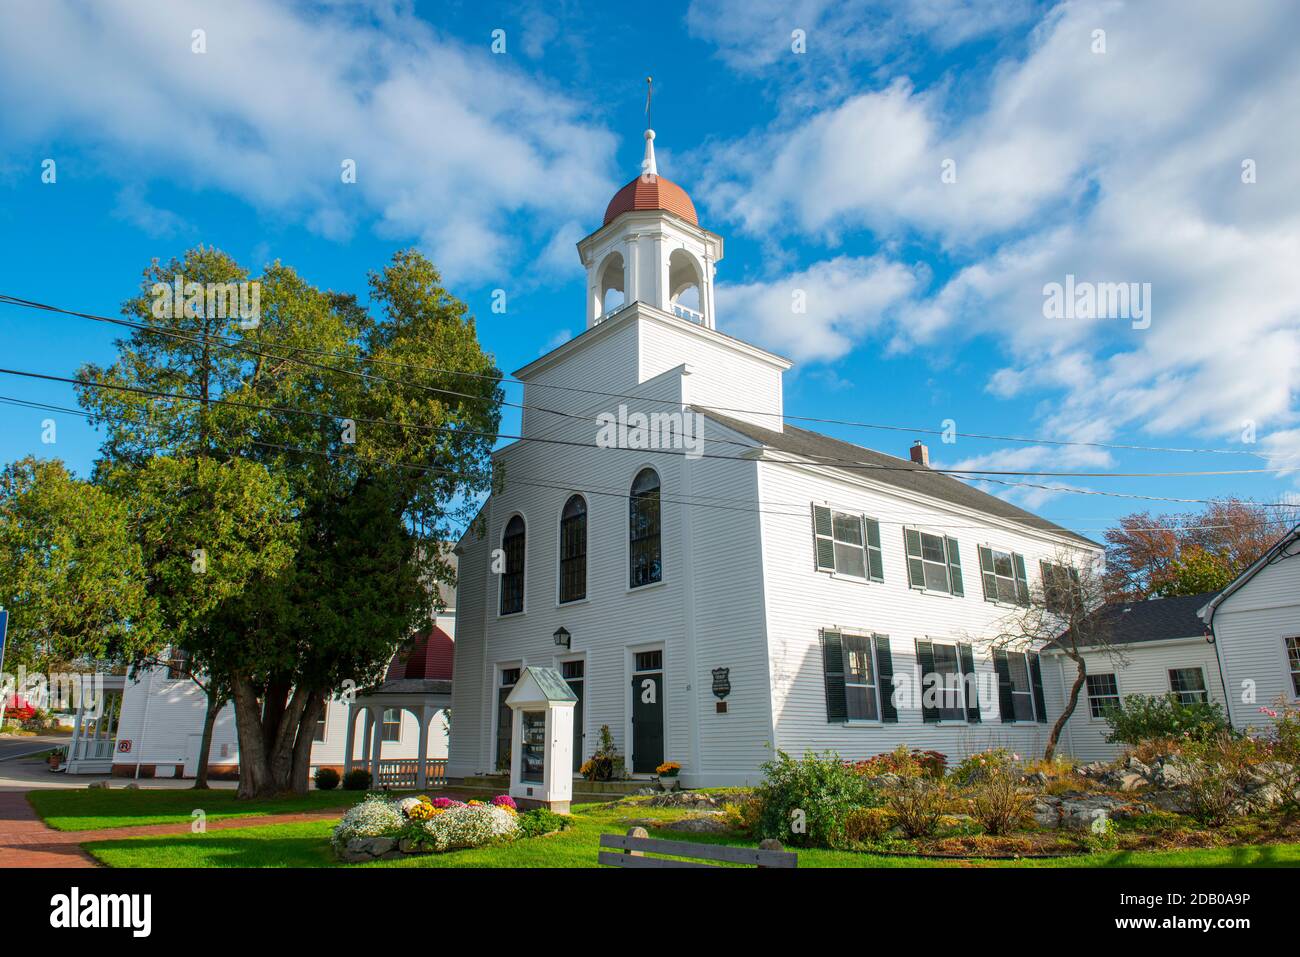 New Castle Congregational Church on Main Street in New Castle, New Hampshire, New Hampshire, USA. Foto Stock